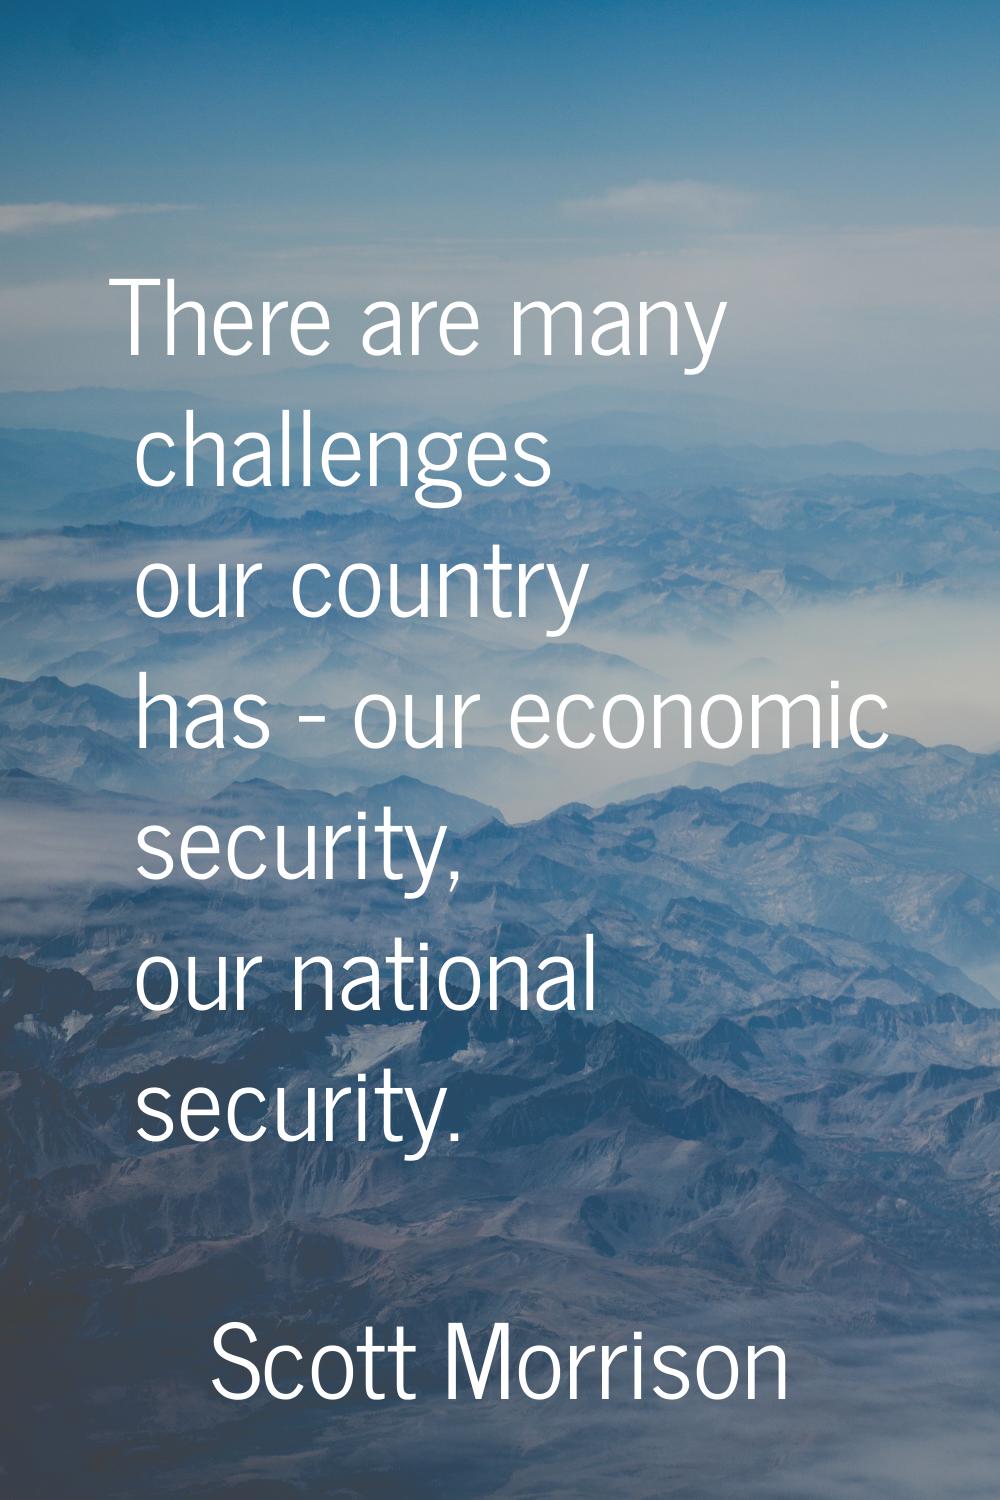 There are many challenges our country has - our economic security, our national security.